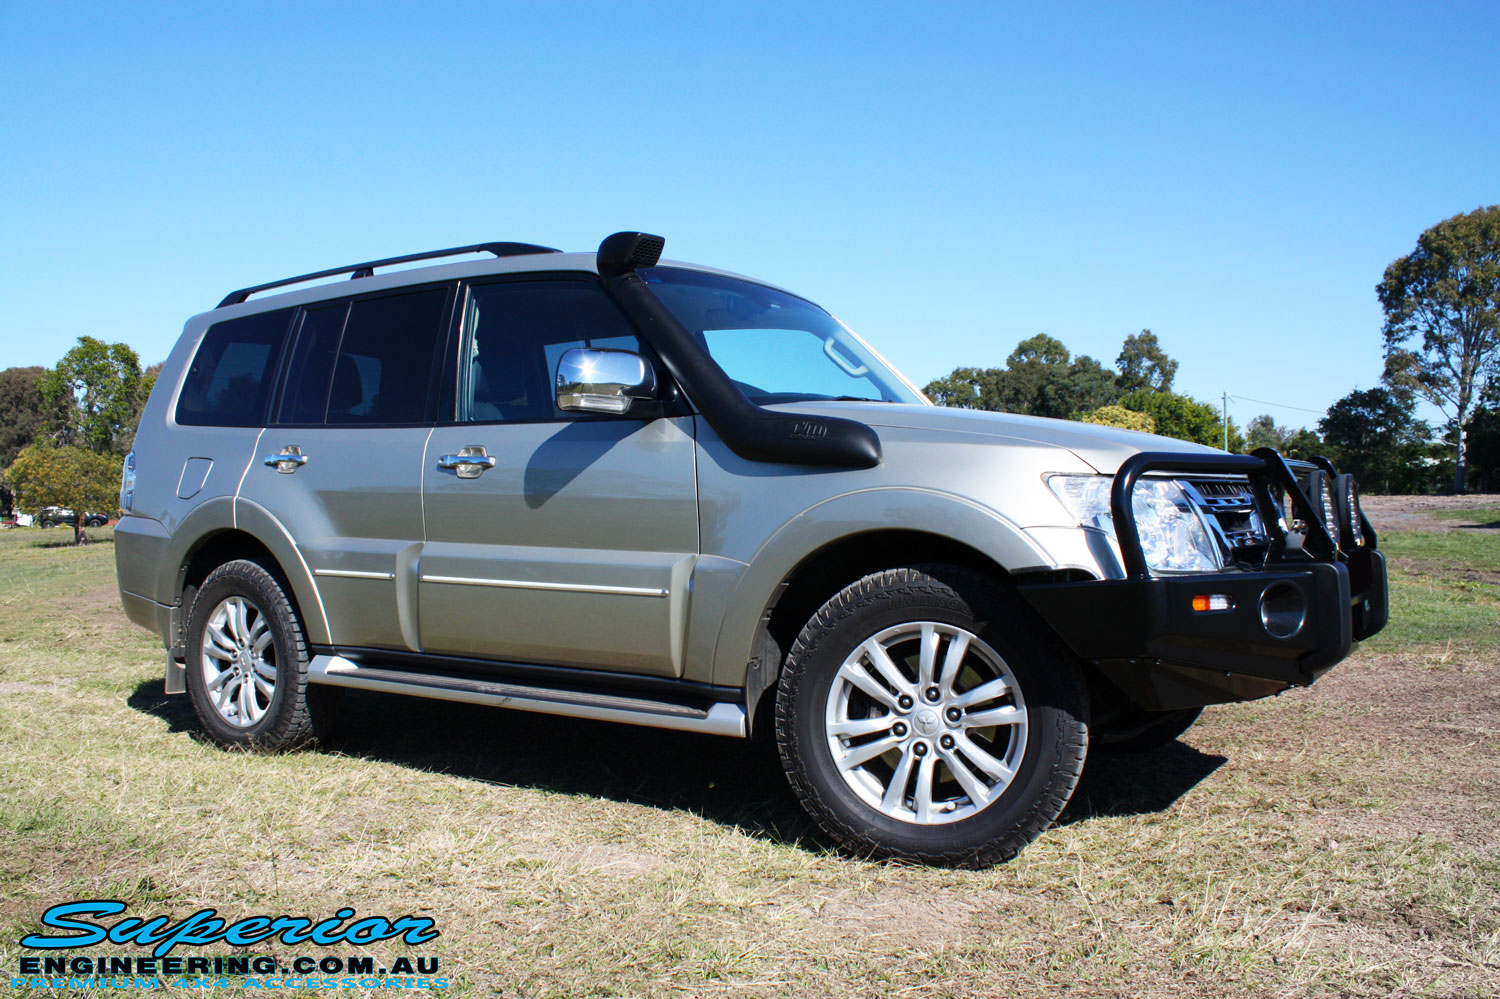 Right front side view of a Mitsubishi Exceed Pajero Wagon in Gold after fitment of a Ironman 4x4 Deluxe Black Commercial Bull Bar